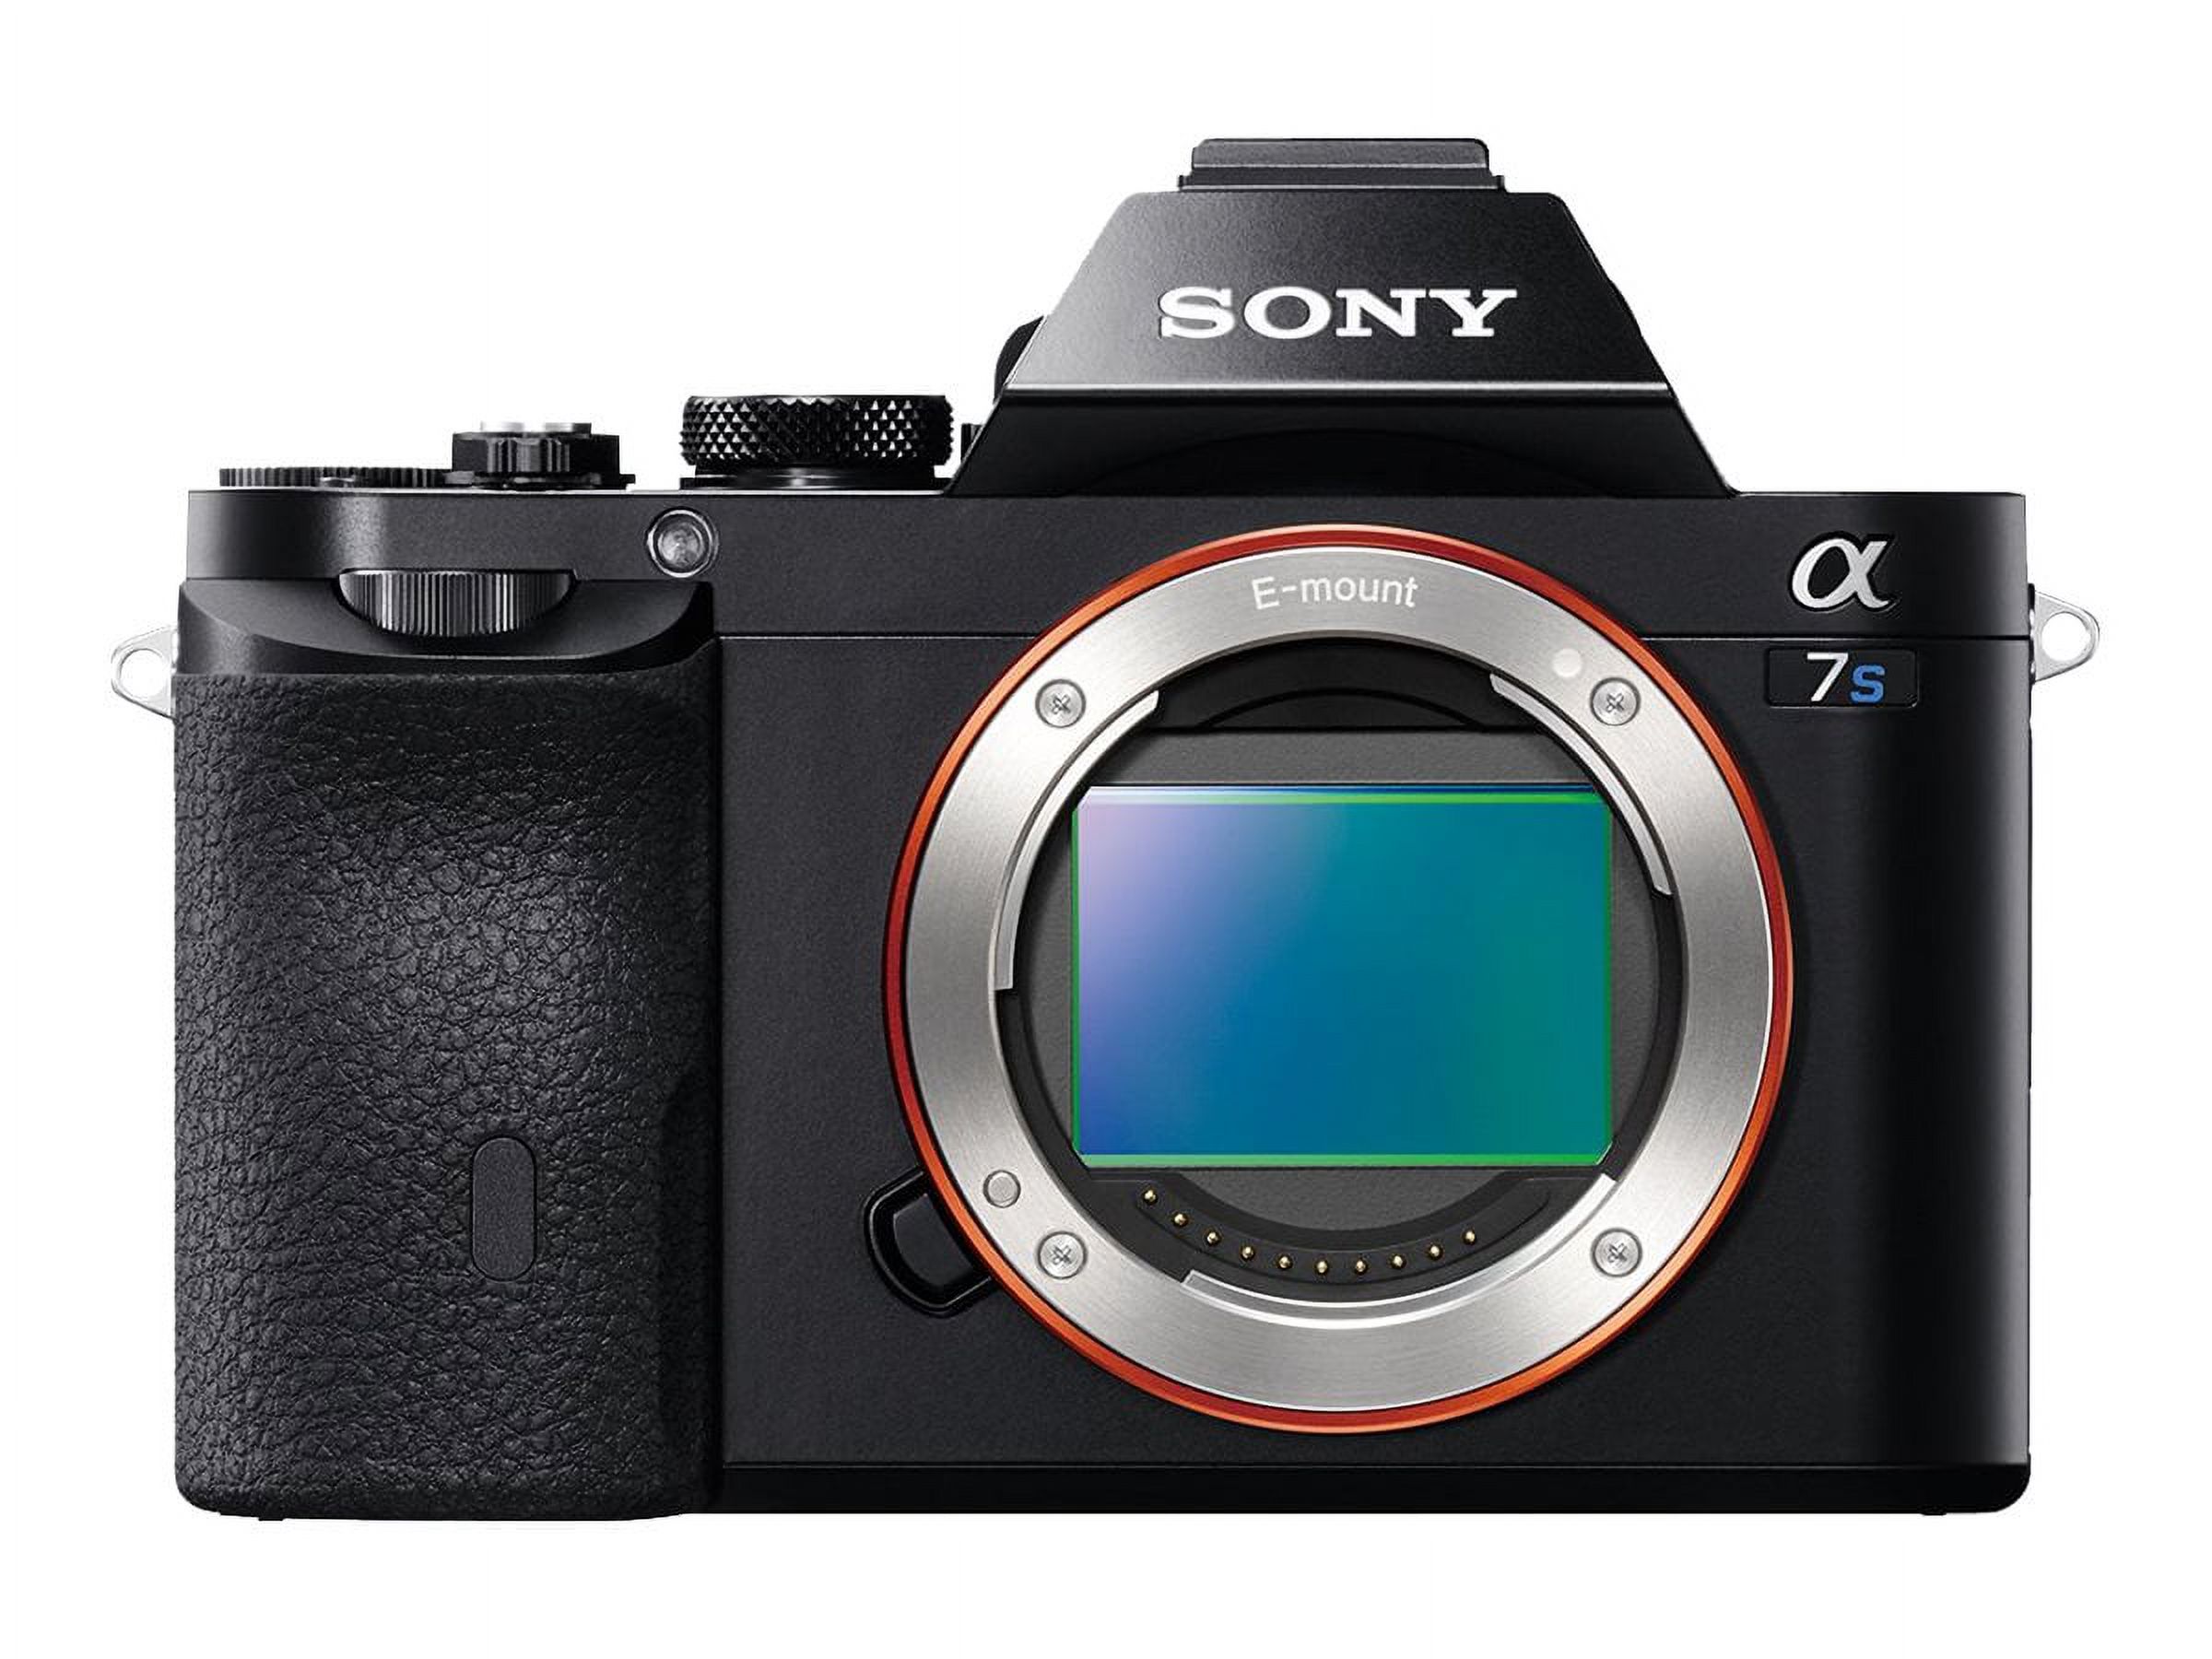 Sony a7s ILCE-7S - Digital camera - mirrorless - 12.2 MP - Full Frame - 1080p / 60 fps - body only - Wireless LAN, NFC - black - image 1 of 15